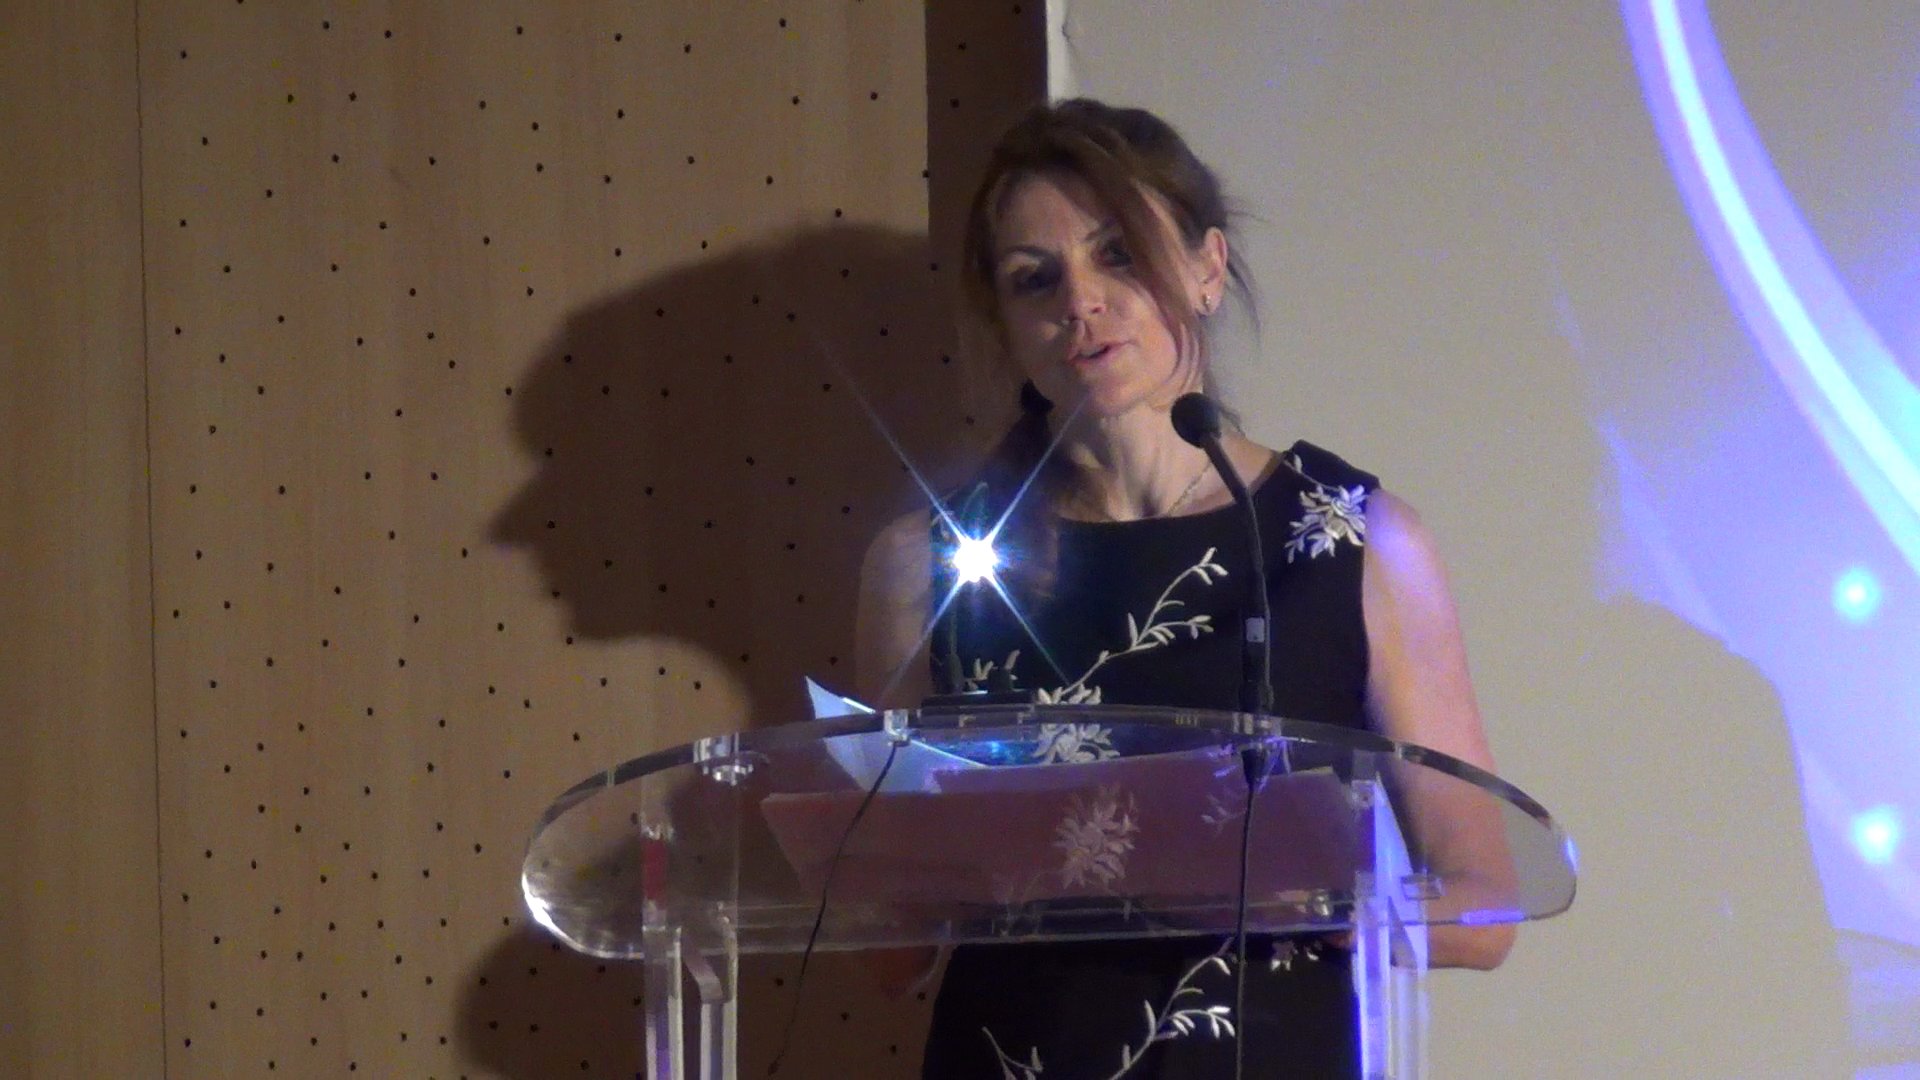 Jolanda Ellenberger talking about her Documentary THE FREEDOM OF THE HEART-LA LIBERTÉ DU COEUR after she receives the BEST DOCUMENTARY AWARENESS SCREENPLAY ANGELS AWARD in Monaco on December 10, 2011.